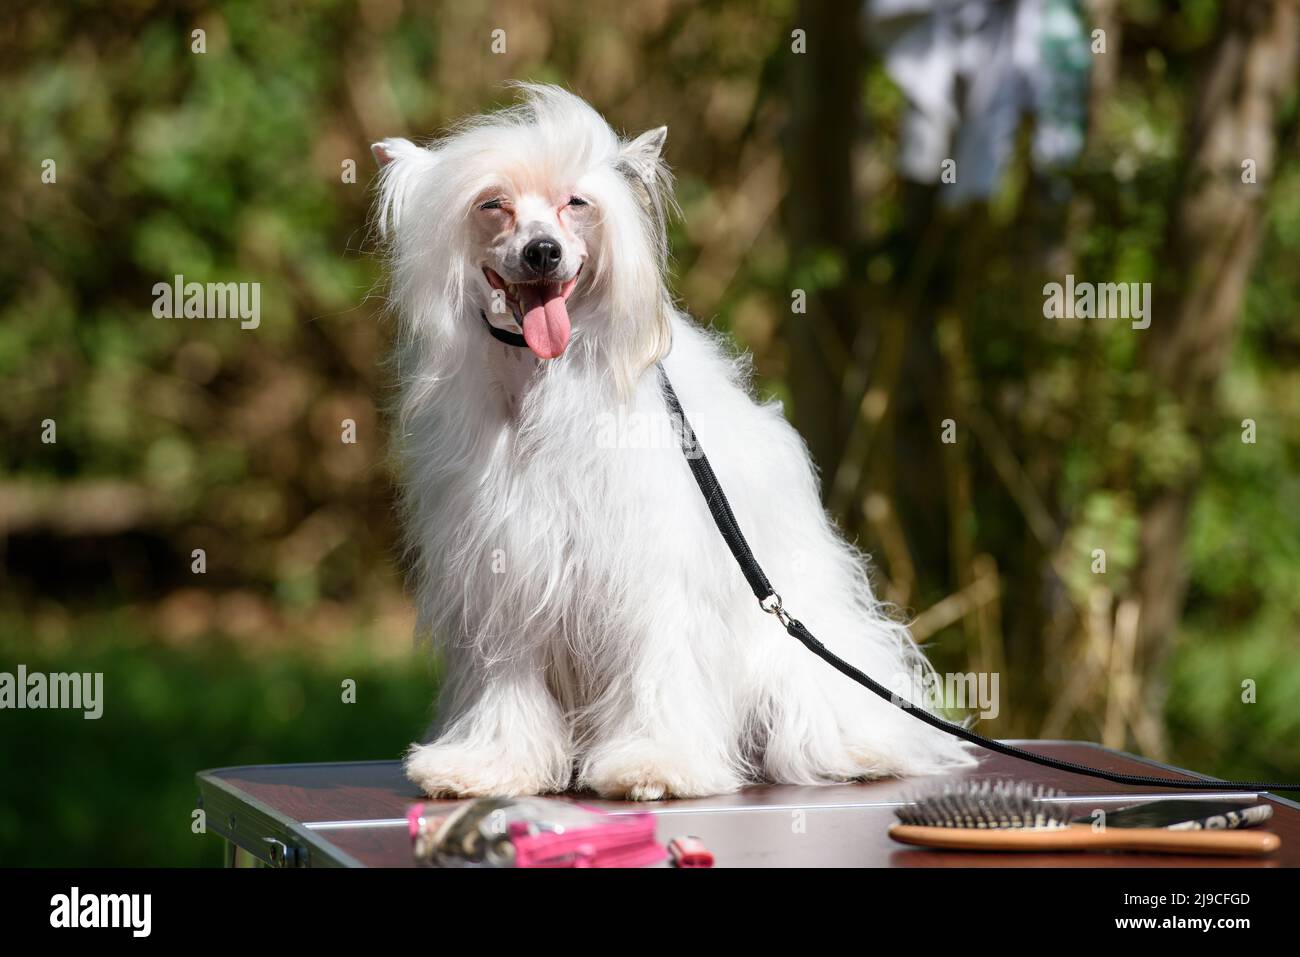 The white dog of the Chinese crested breed stuck out its tongue and looks merrily to the right. The dog is sitting on a table in the park. Close-up. Stock Photo